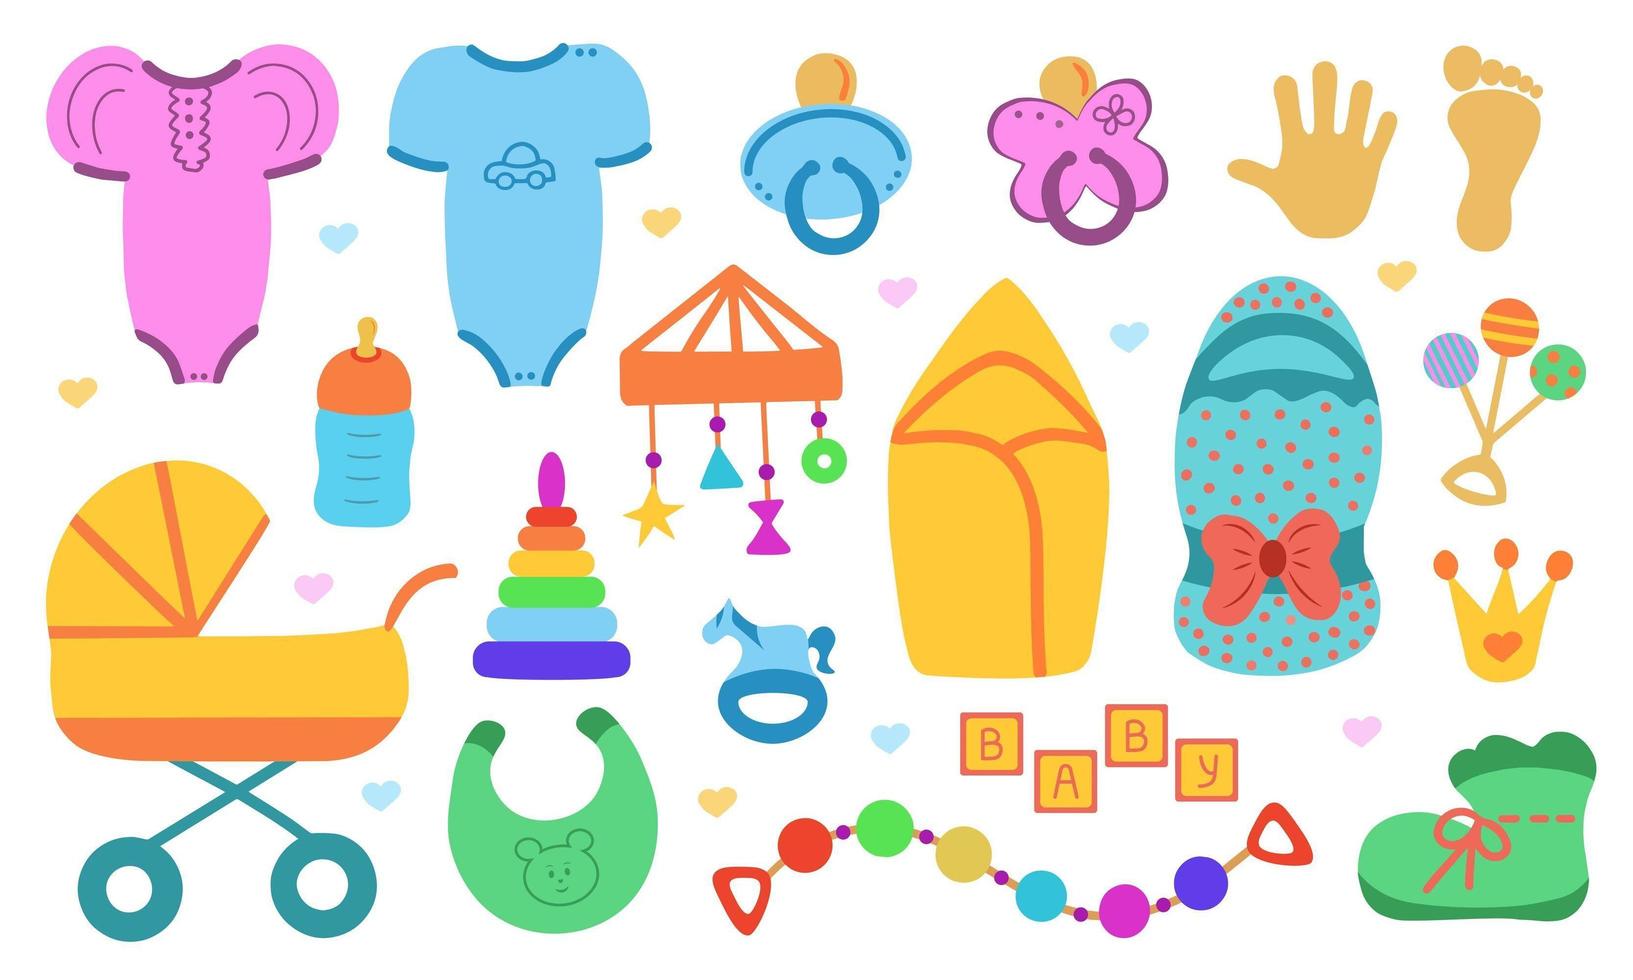 https://static.vecteezy.com/system/resources/previews/005/157/521/non_2x/newborn-things-cute-set-of-things-for-childrenhood-isolated-icons-of-baby-goods-for-newborns-clothing-toys-accessories-for-hygiene-food-for-infant-vector.jpg